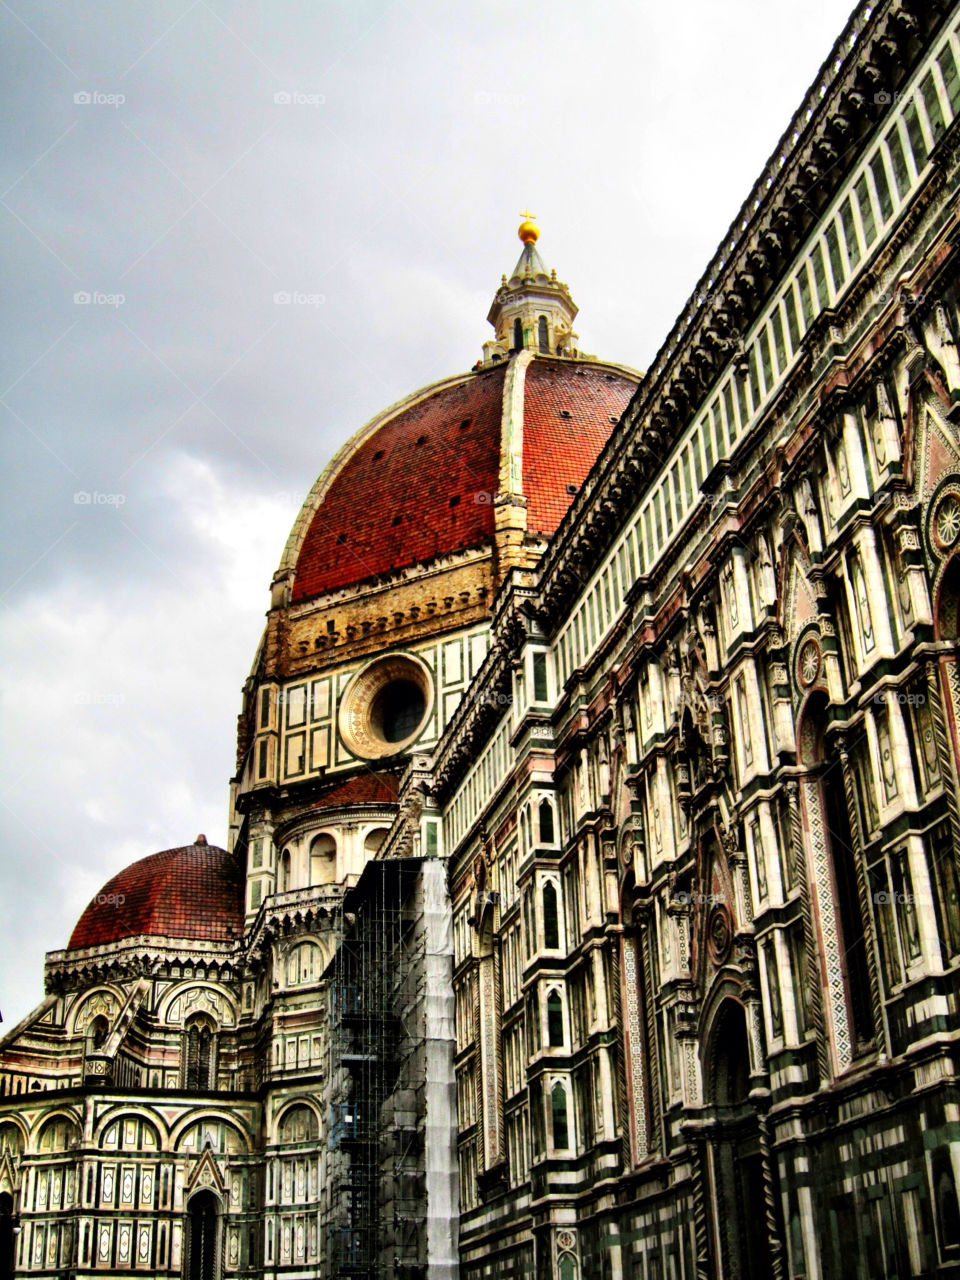 The Il Duomo in Florence